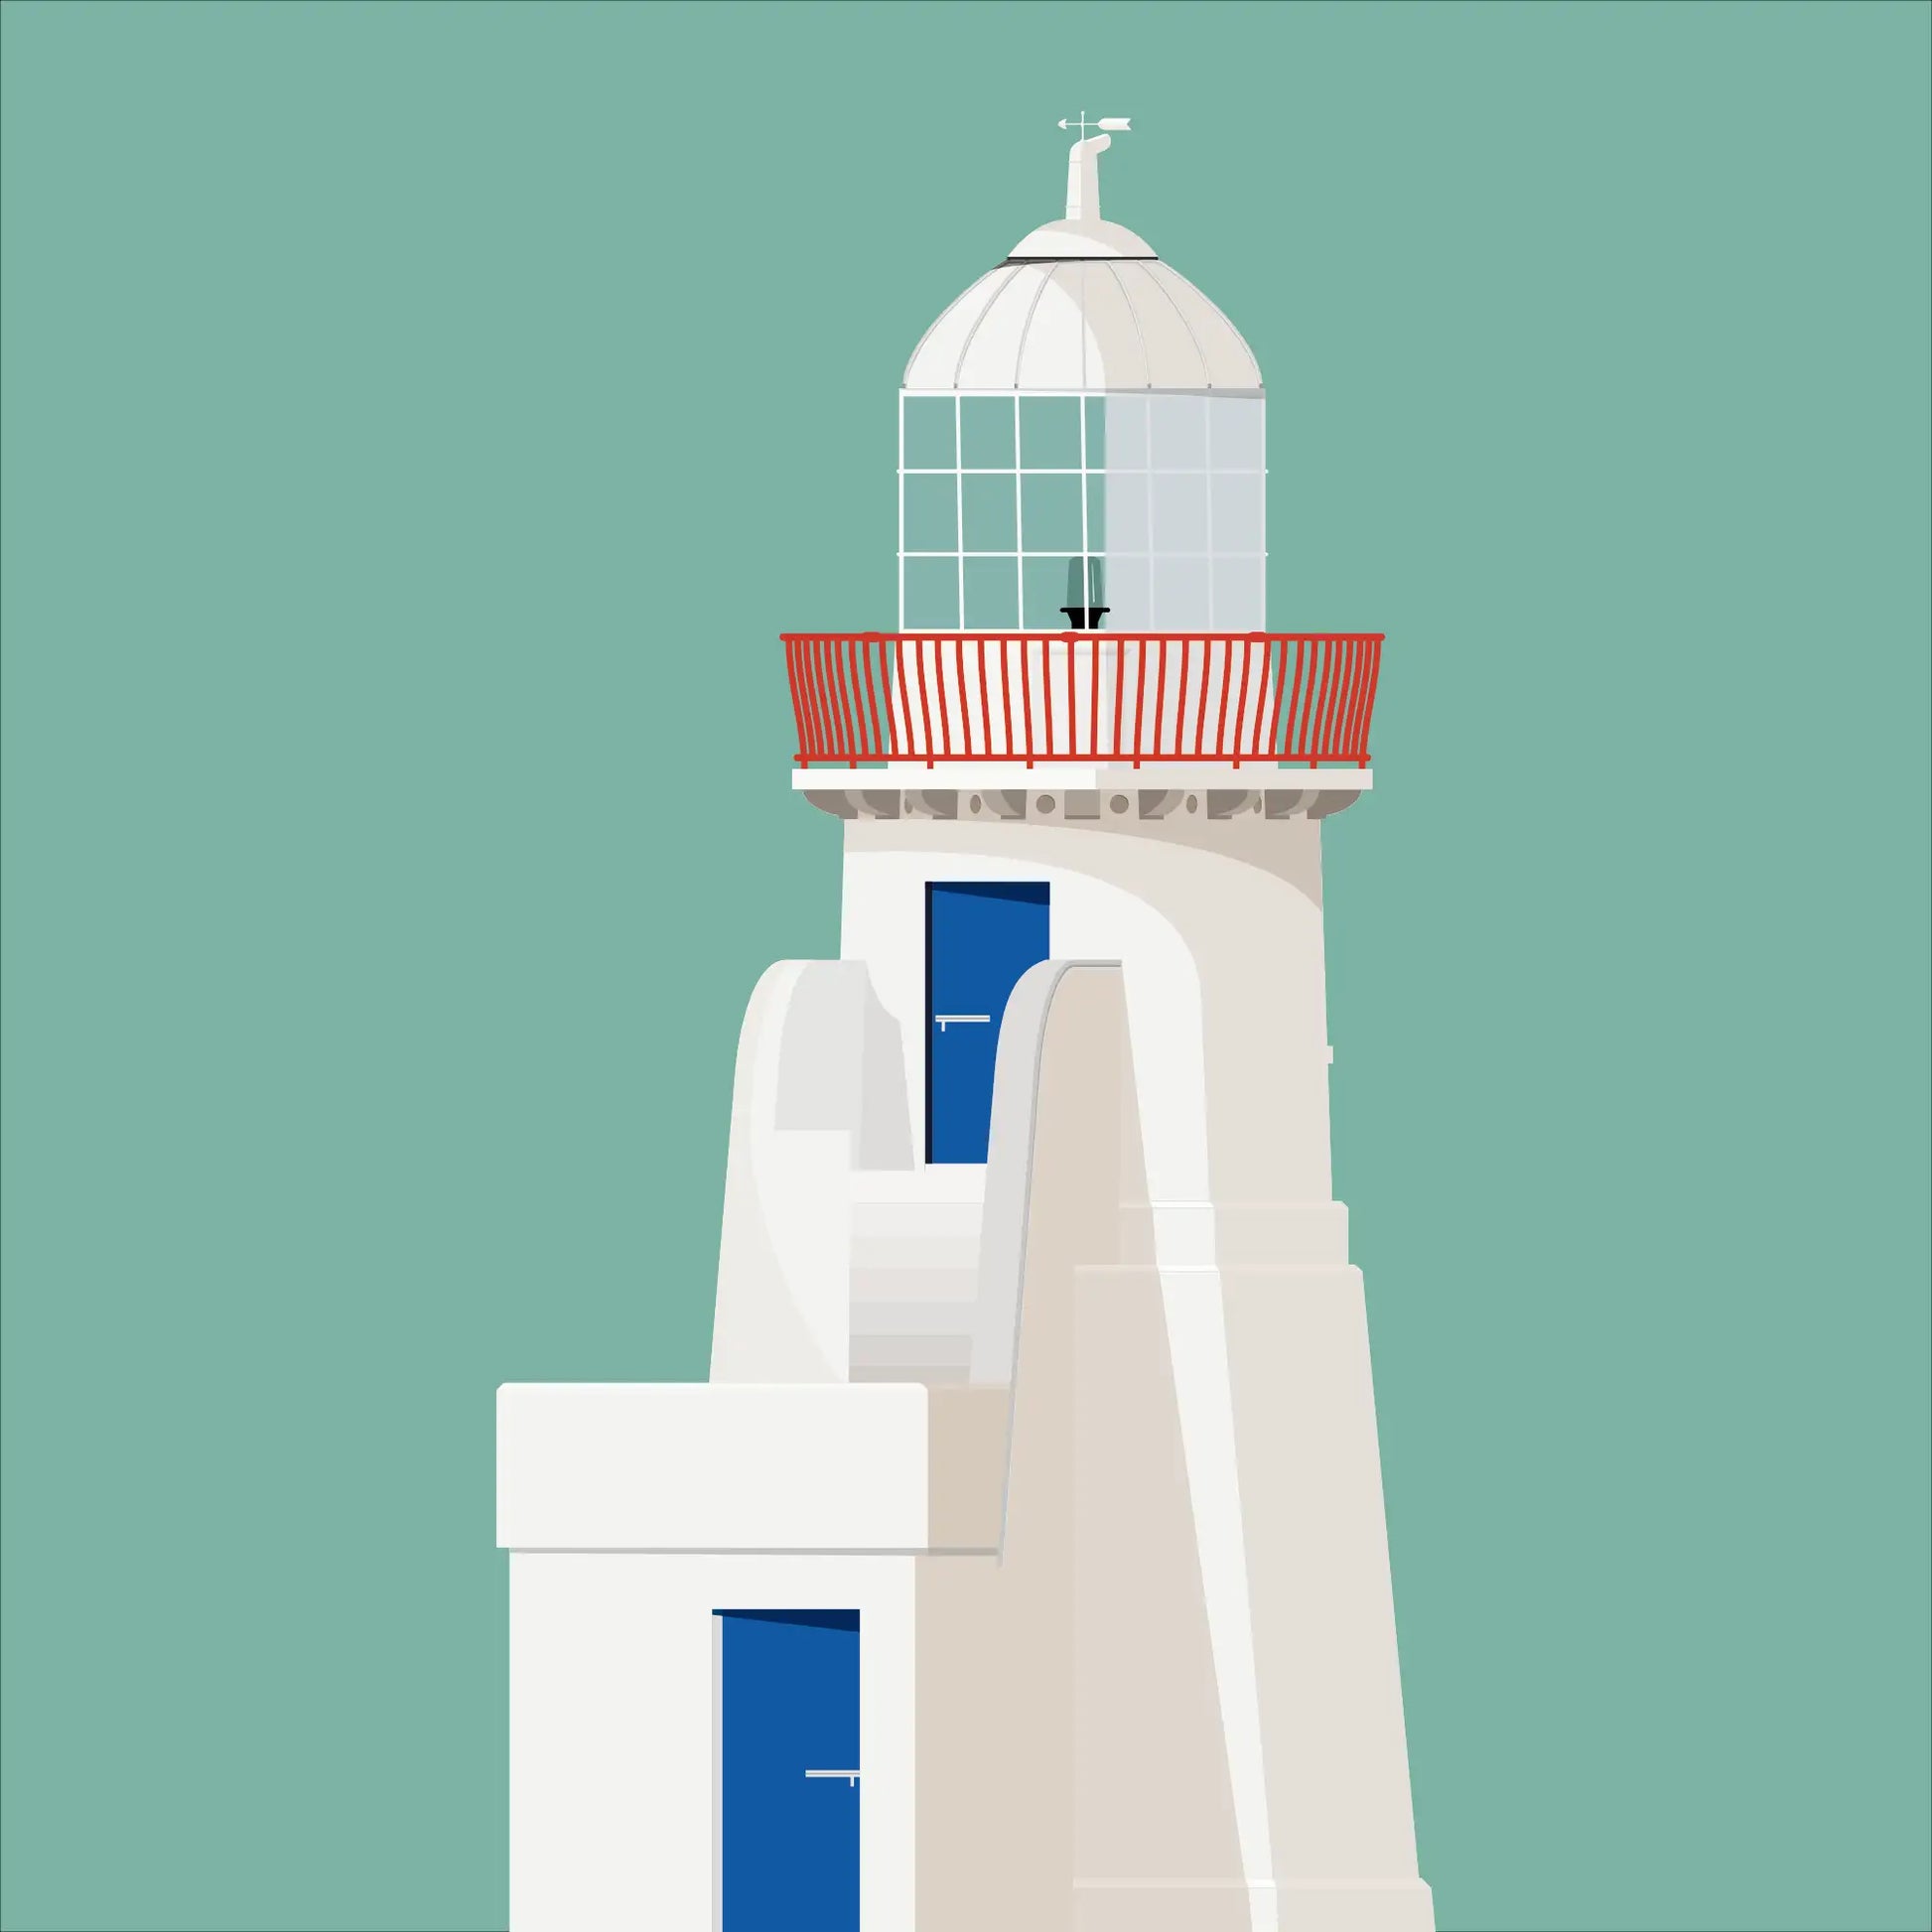 Contemporary graphic illustration of Ballbriggan lighthouse on a white background inside light blue square.